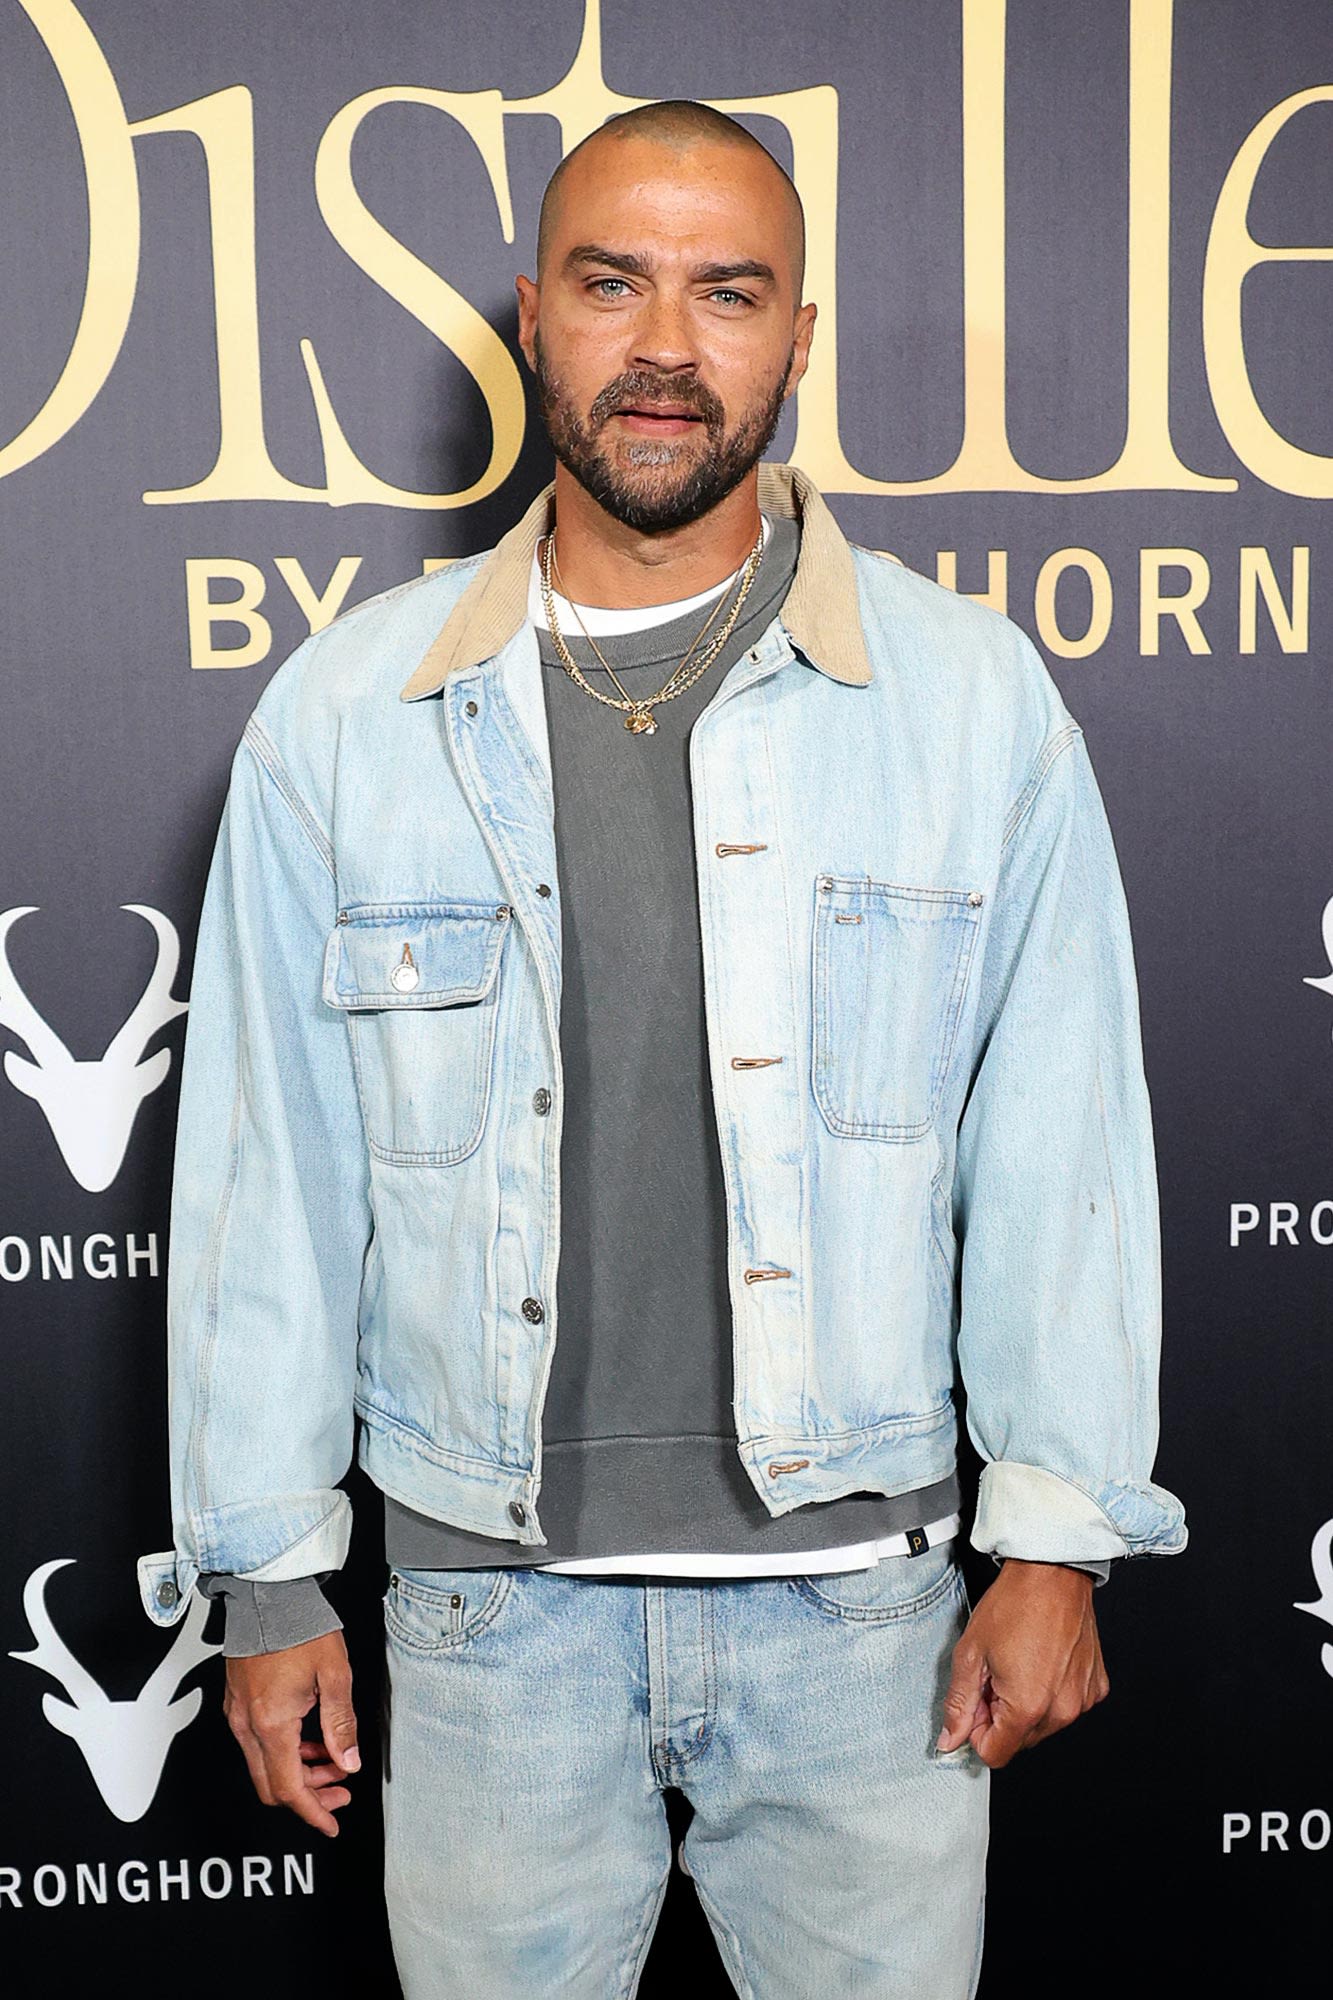 Jesse Williams Has ‘Duty’ to Shine a ‘Light on All Things Black That Are Positive and Constructive’